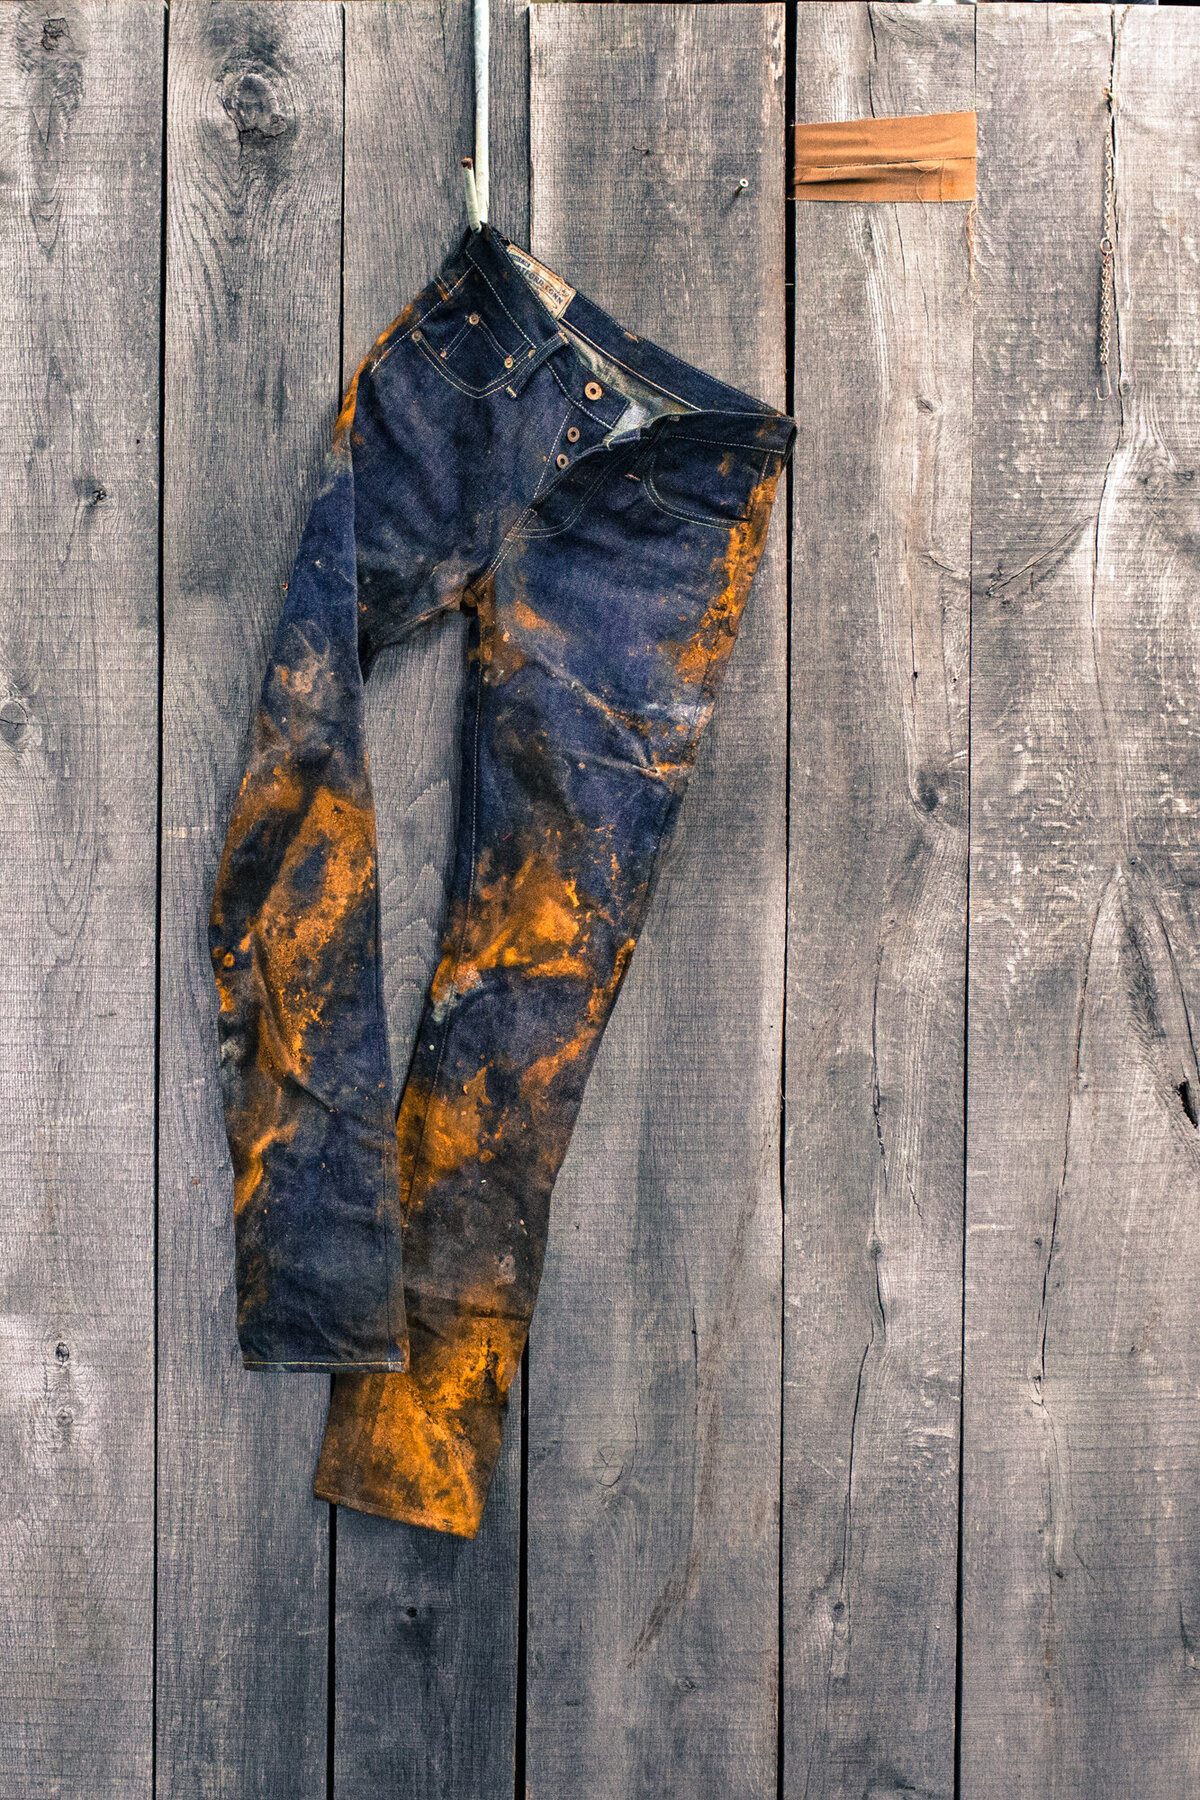 jeans hanging on wall_environmental image